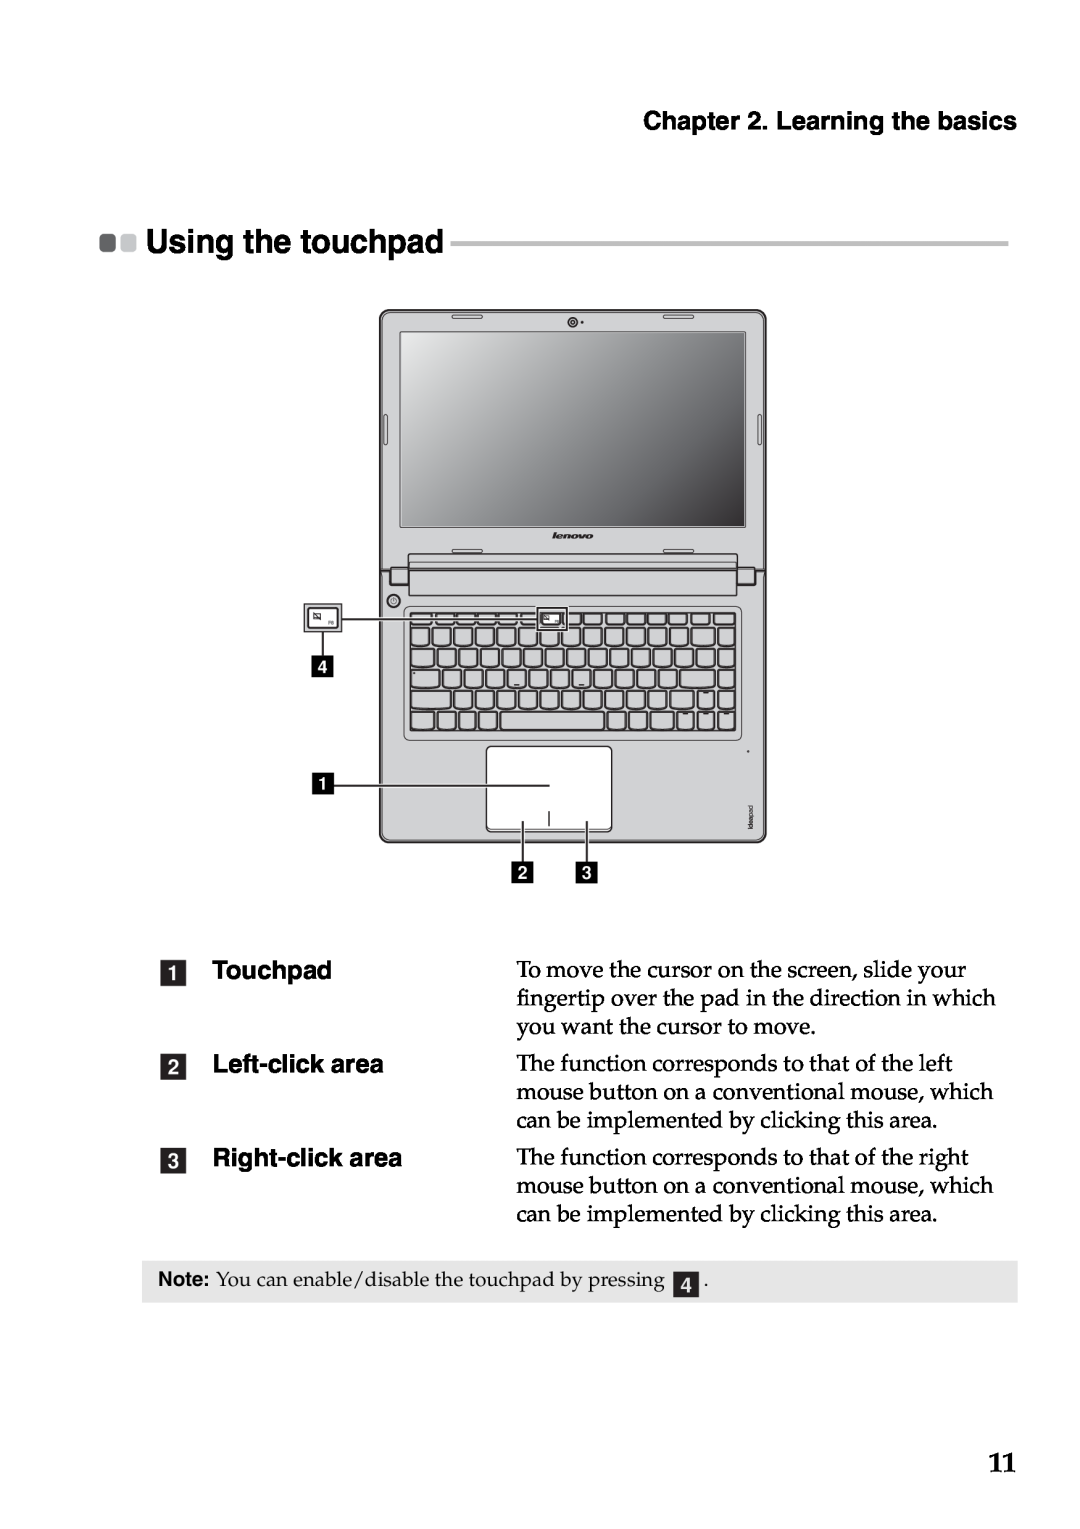 Lenovo S405, S300, S400 manual Using the touchpad, a Touchpad, b Left-click area, c Right-click area, Learning the basics 